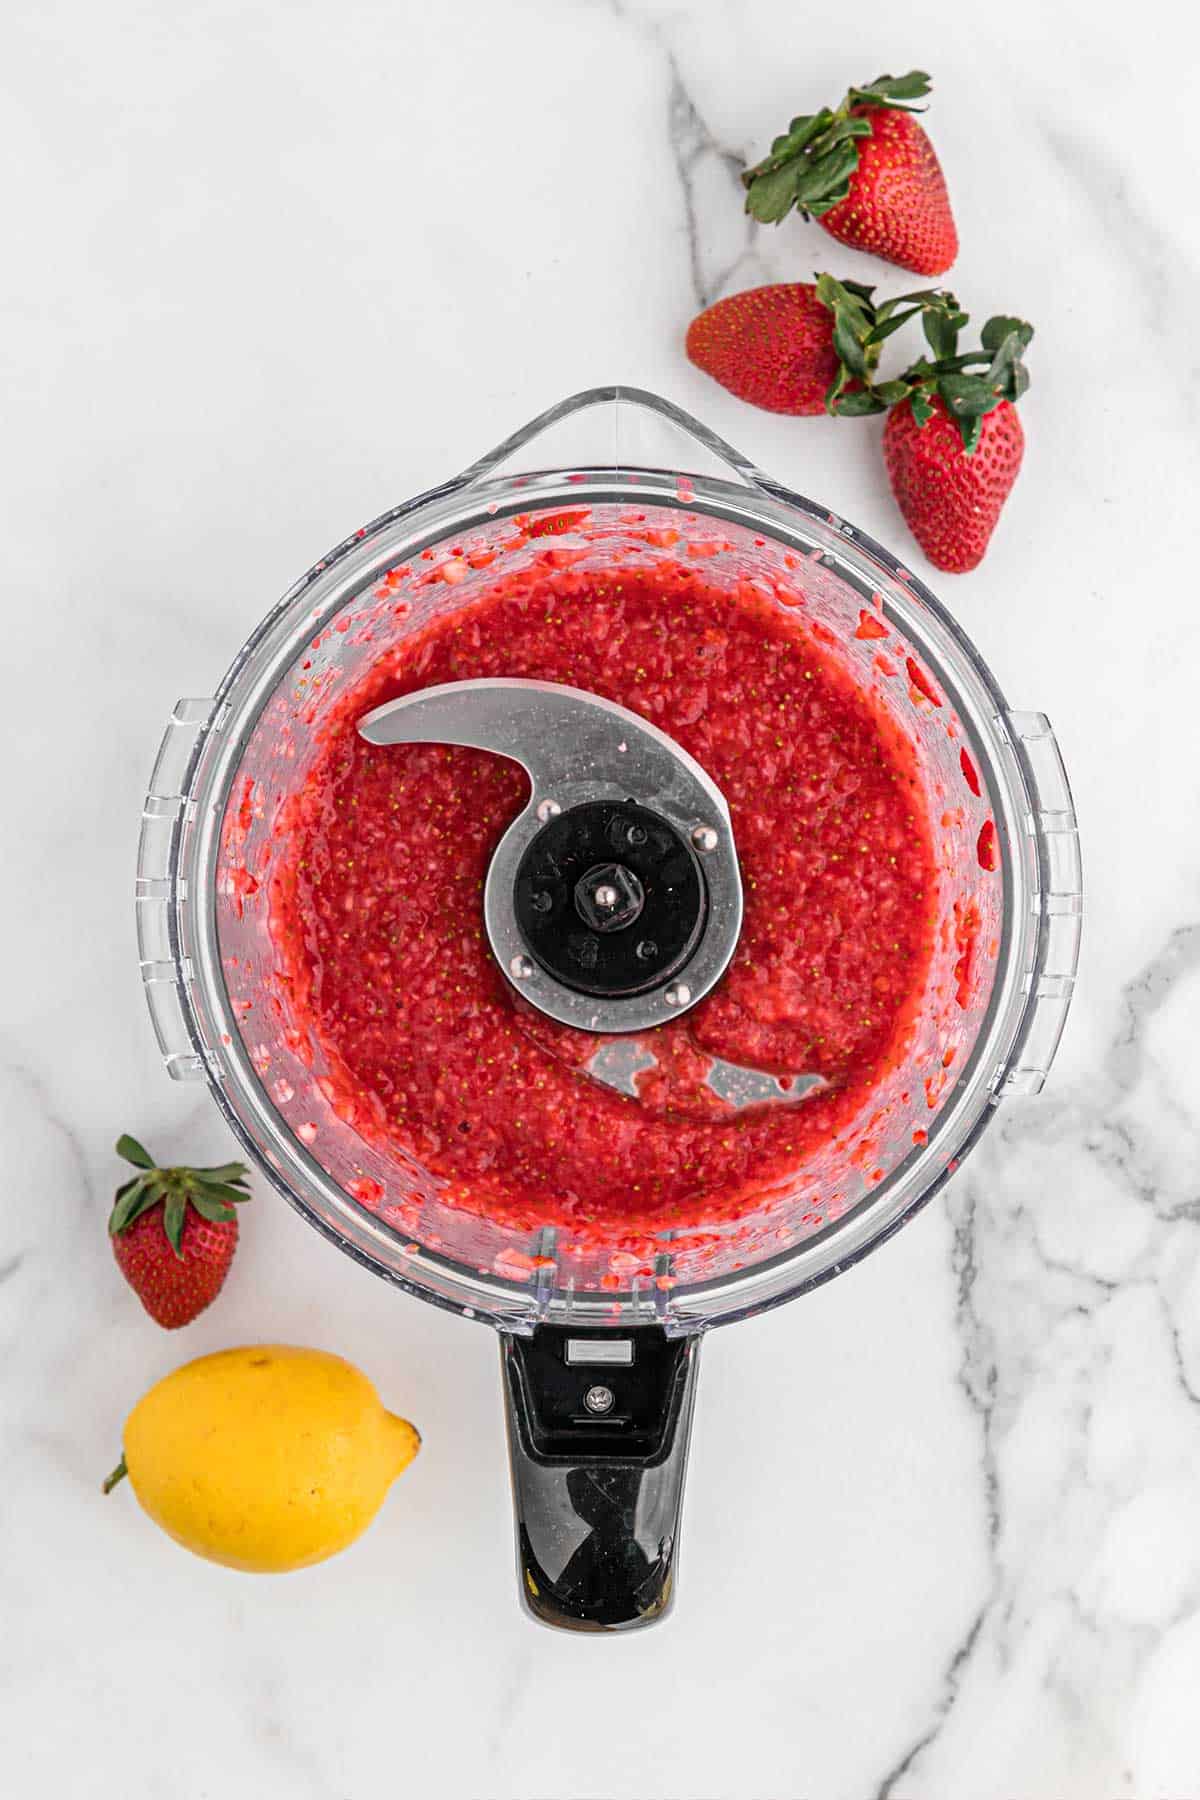 Strawberries pureed in a food processor.